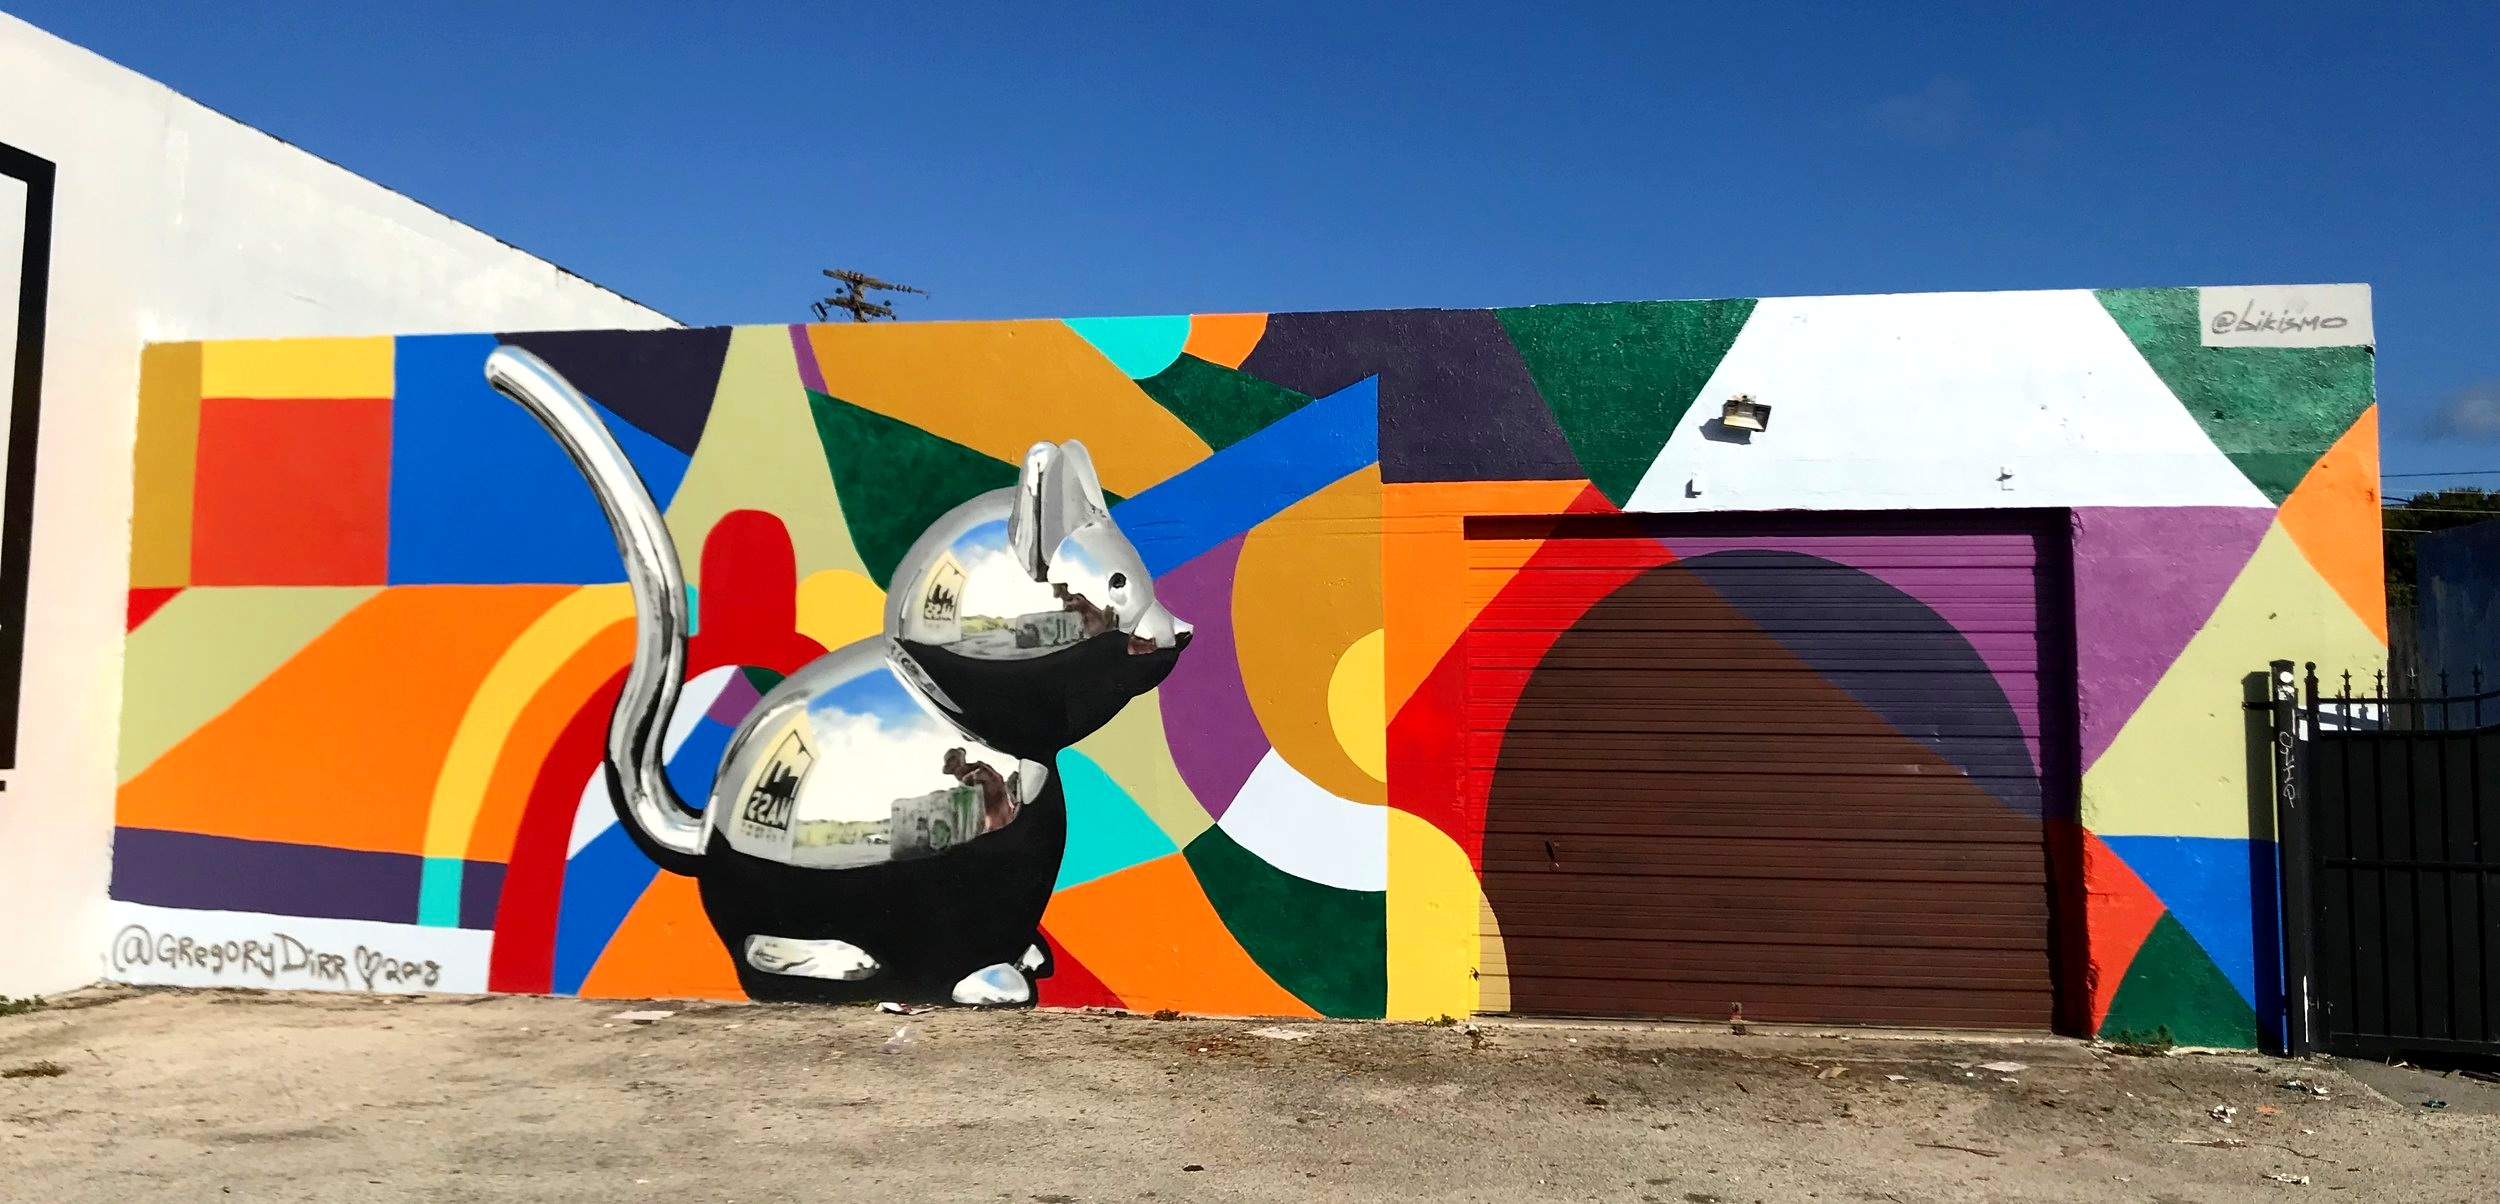   Variation Of 1 And 2  facade mural commissioned by Crates Tavern. part of my Color Abstractions series 45’w x 15’h 824 NE 4th Ave, Fort Lauderdale, FL, 33304. 2018 mouse by artist   Bikismo   